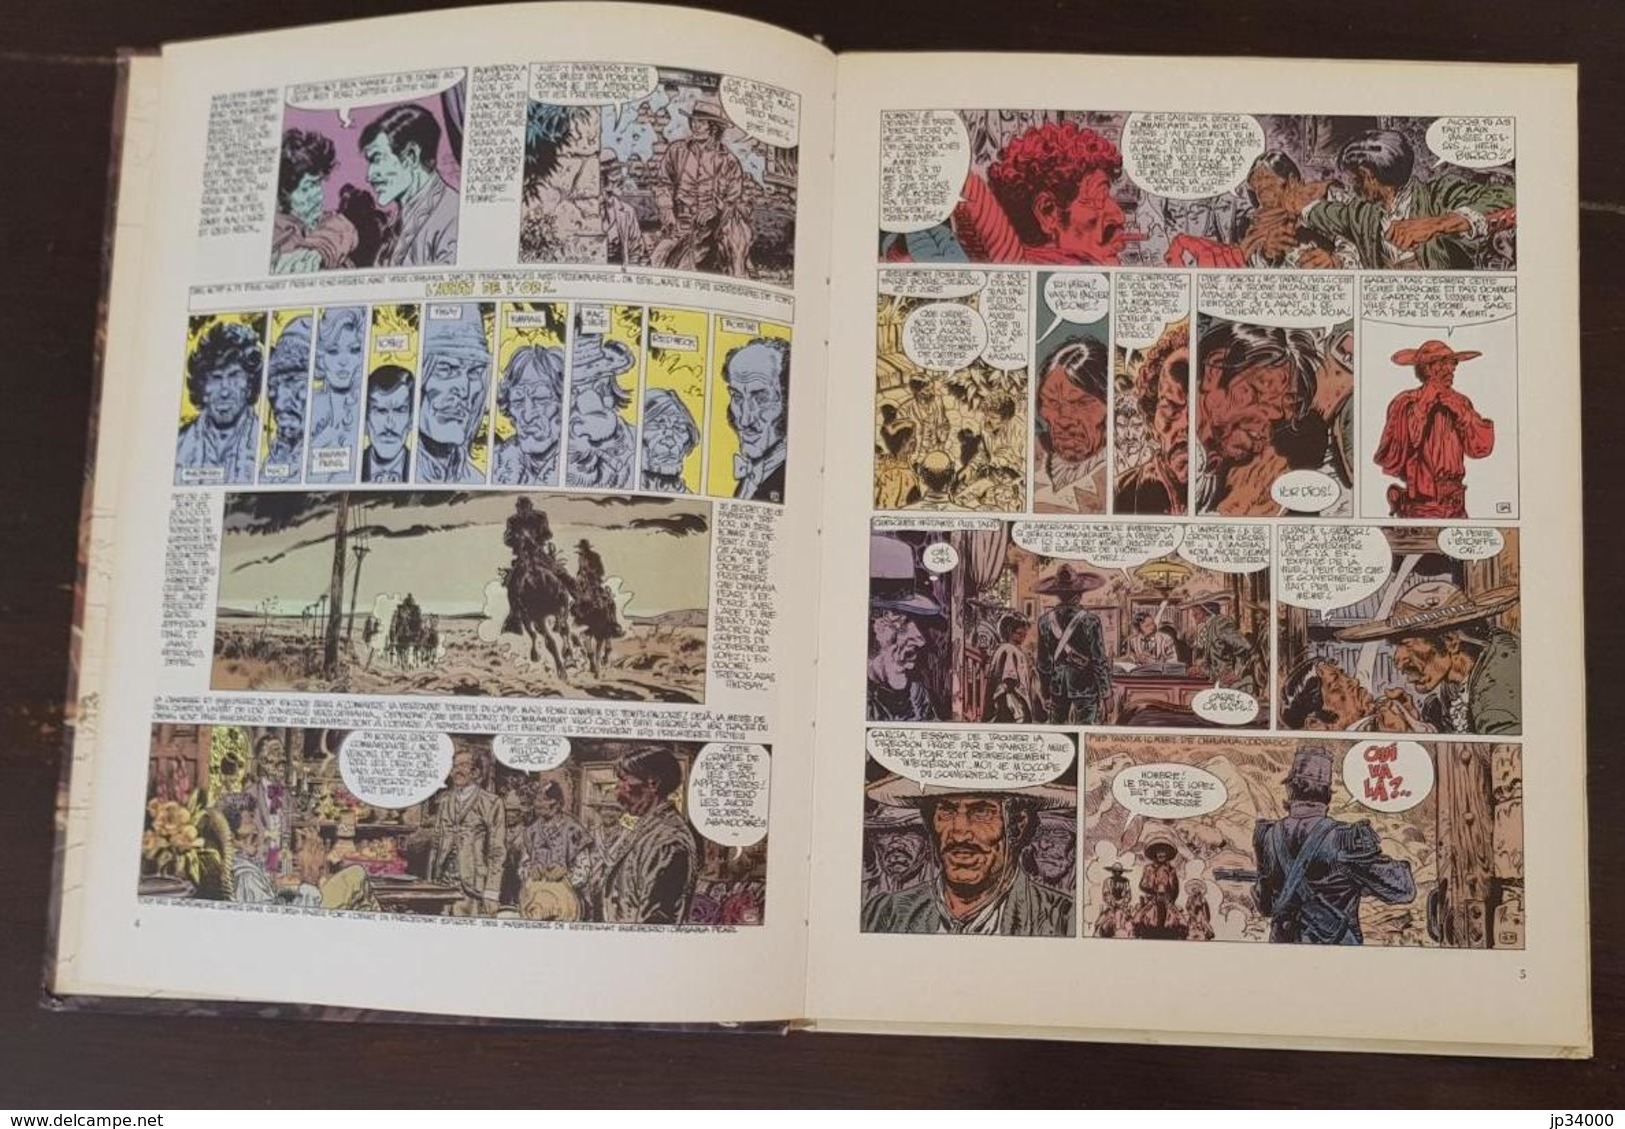 BLUEBERRY: L'homme qui valait 500 000$ EO 1973. Giraud Charlier. Ed du Lombard (A)